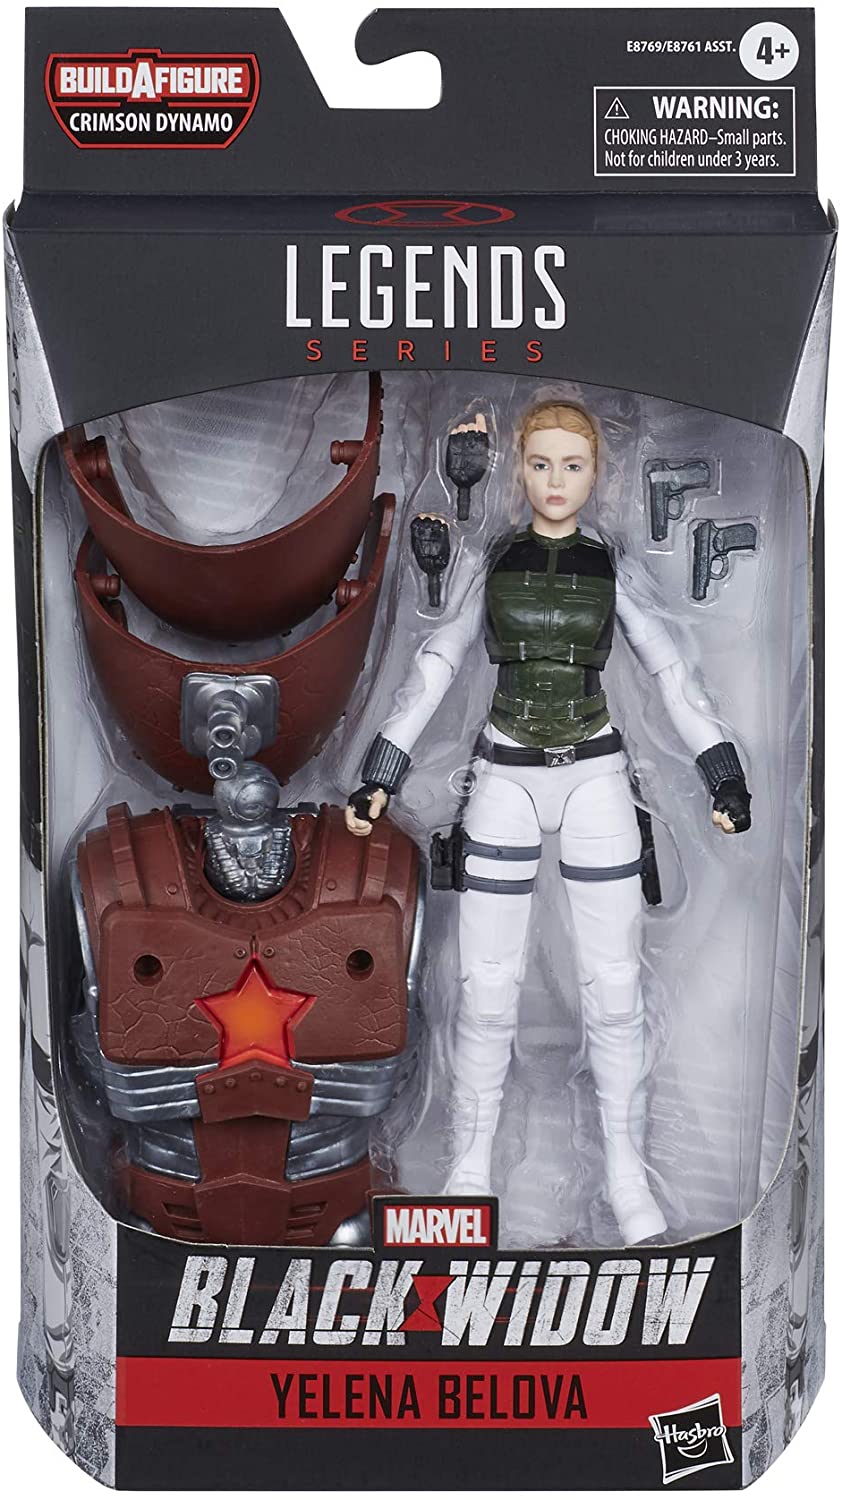 Marvel Hasbro Black Widow Legends Series 6-inch Collectible Yelena Belova Action Figure Toy, Premium Design, 2 Accessories, Ages 4 and Up